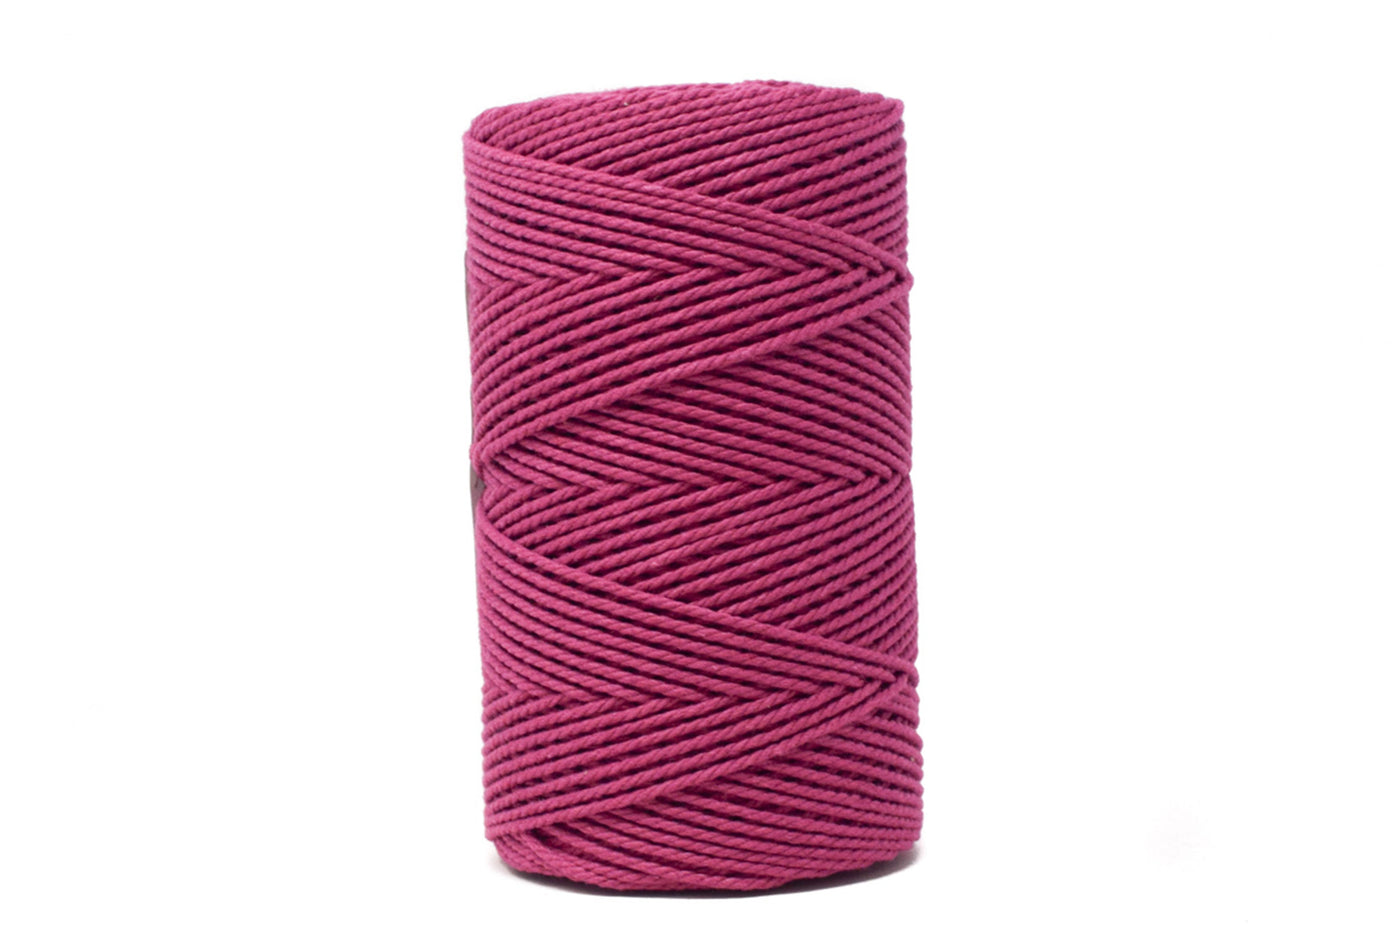 COTTON ROPE ZERO WASTE 2 MM - 3 PLY  - RASPBERRY COLOR